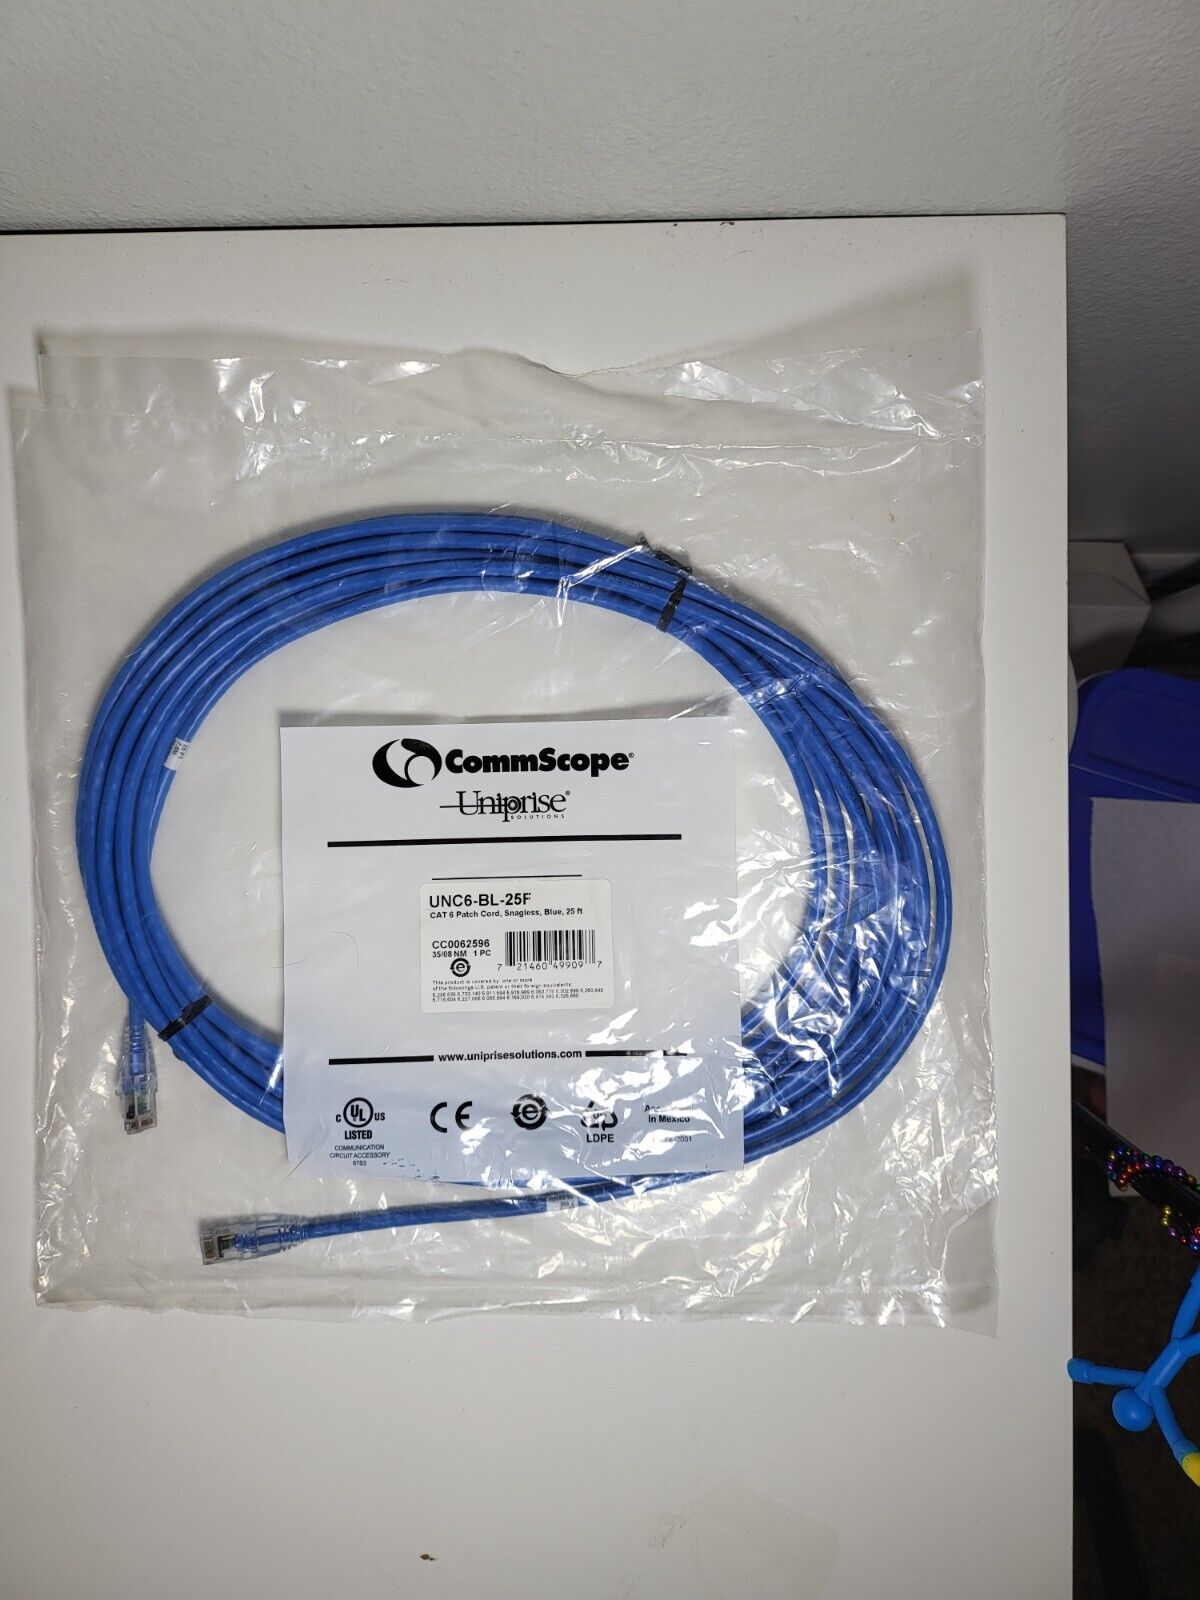 Commscope Uniprise Solutions UNC6-BL-25F Cat 6 Patch Cord, Snagless, Blue, 25 ft